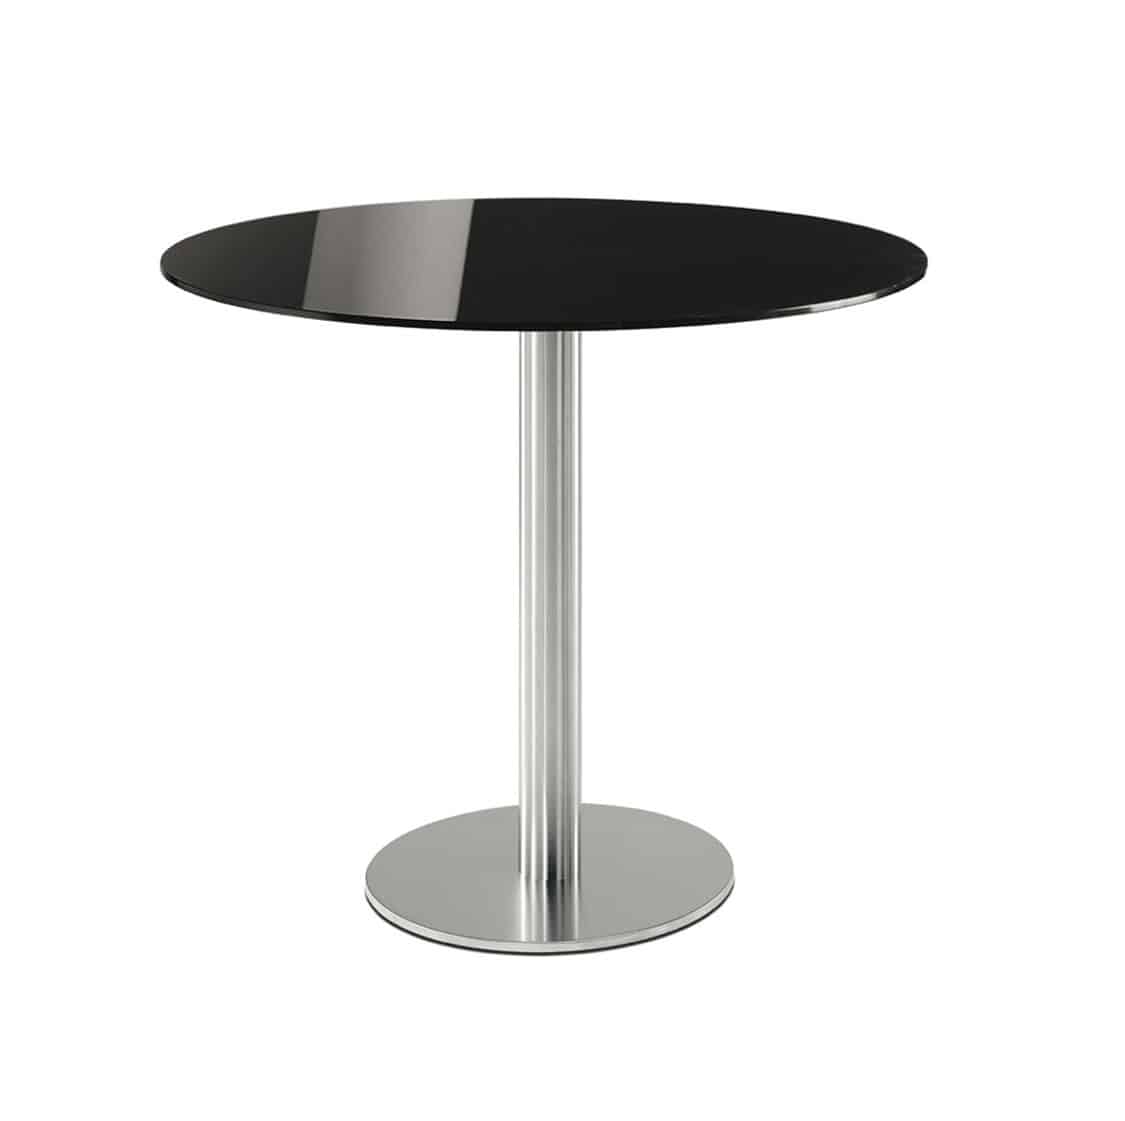 Inox Chrome Round 4411 Tablebase Pedrali at DeFrae Contract Furniture